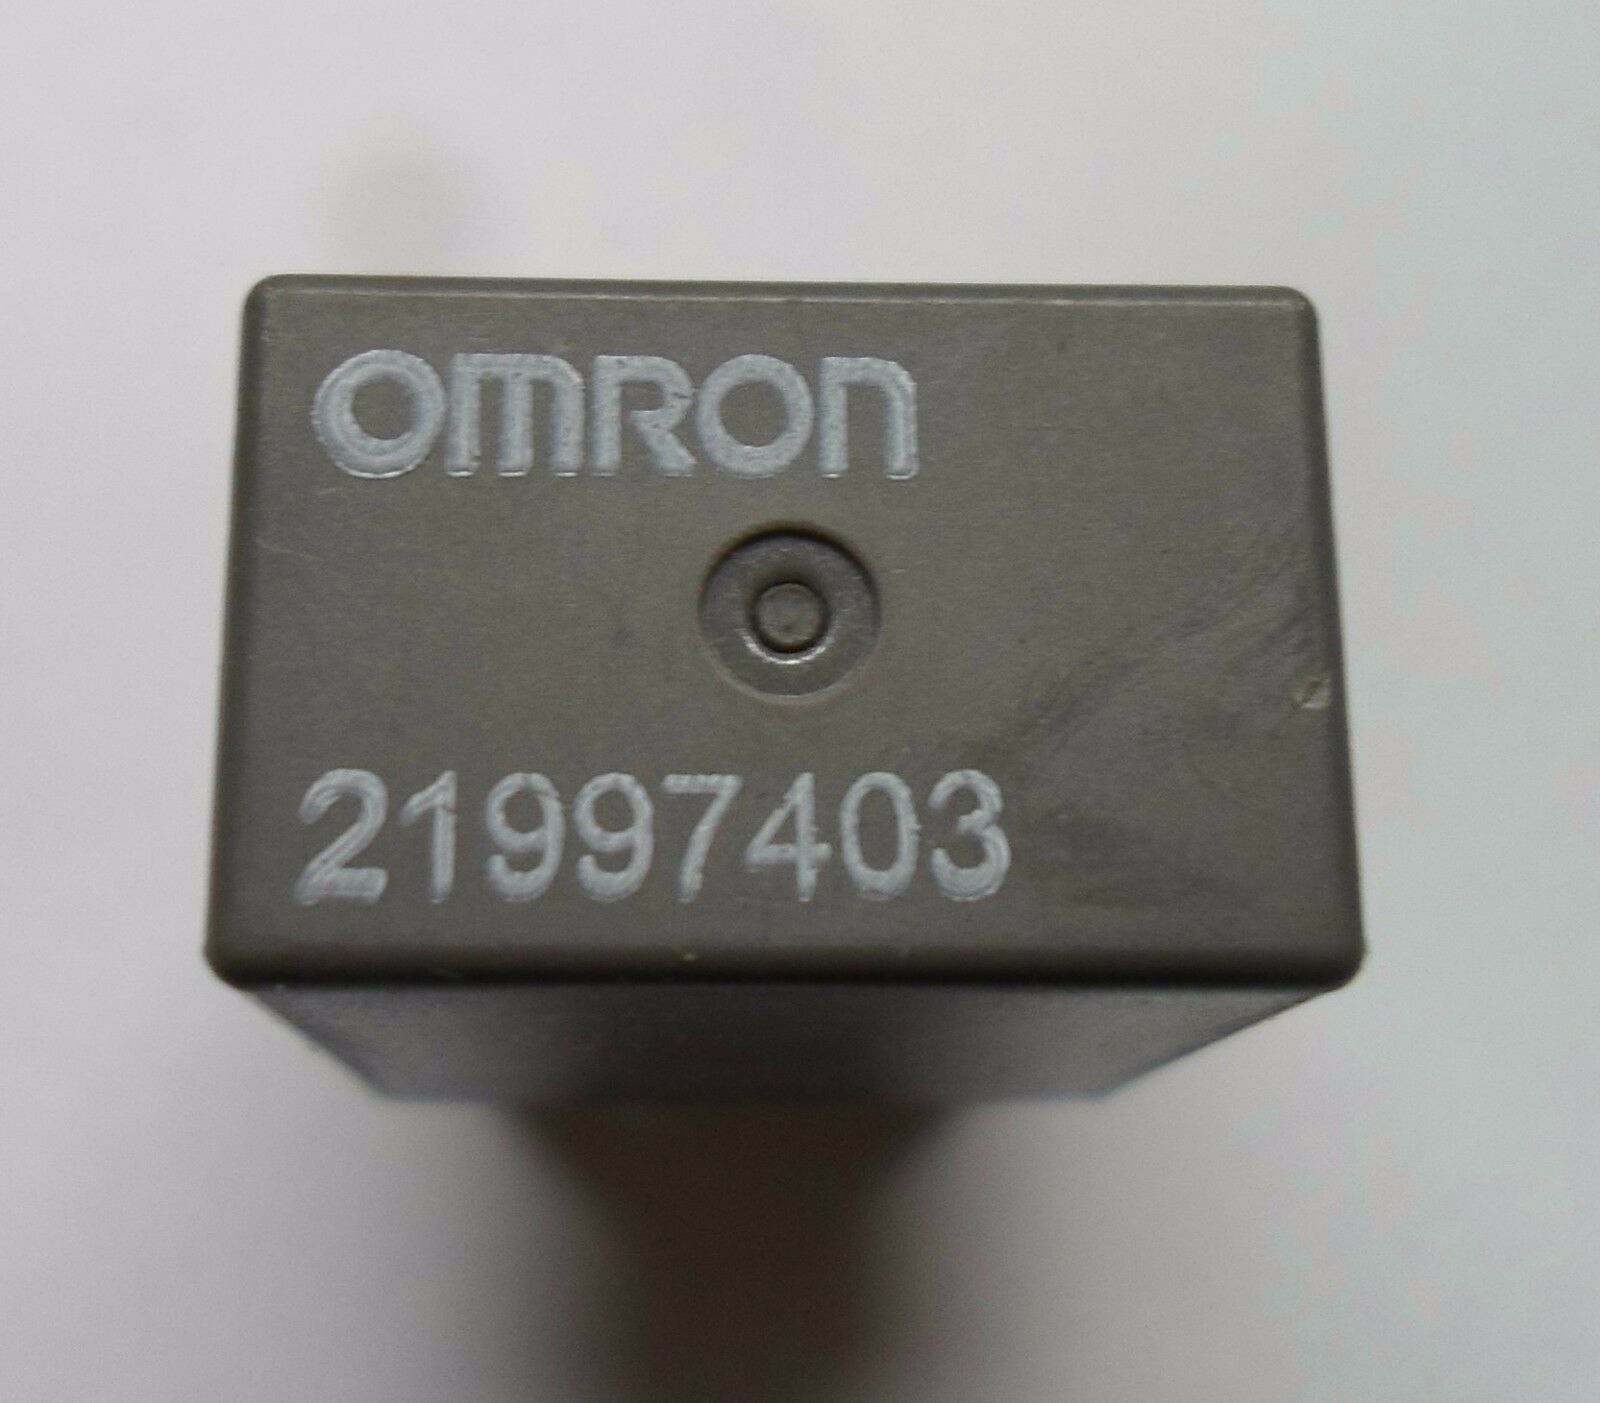 GM OMRON  RELAY 21997403   TESTED 1 YEAR WARRANTY  FREE SHIPPING!  GM3 - $9.95